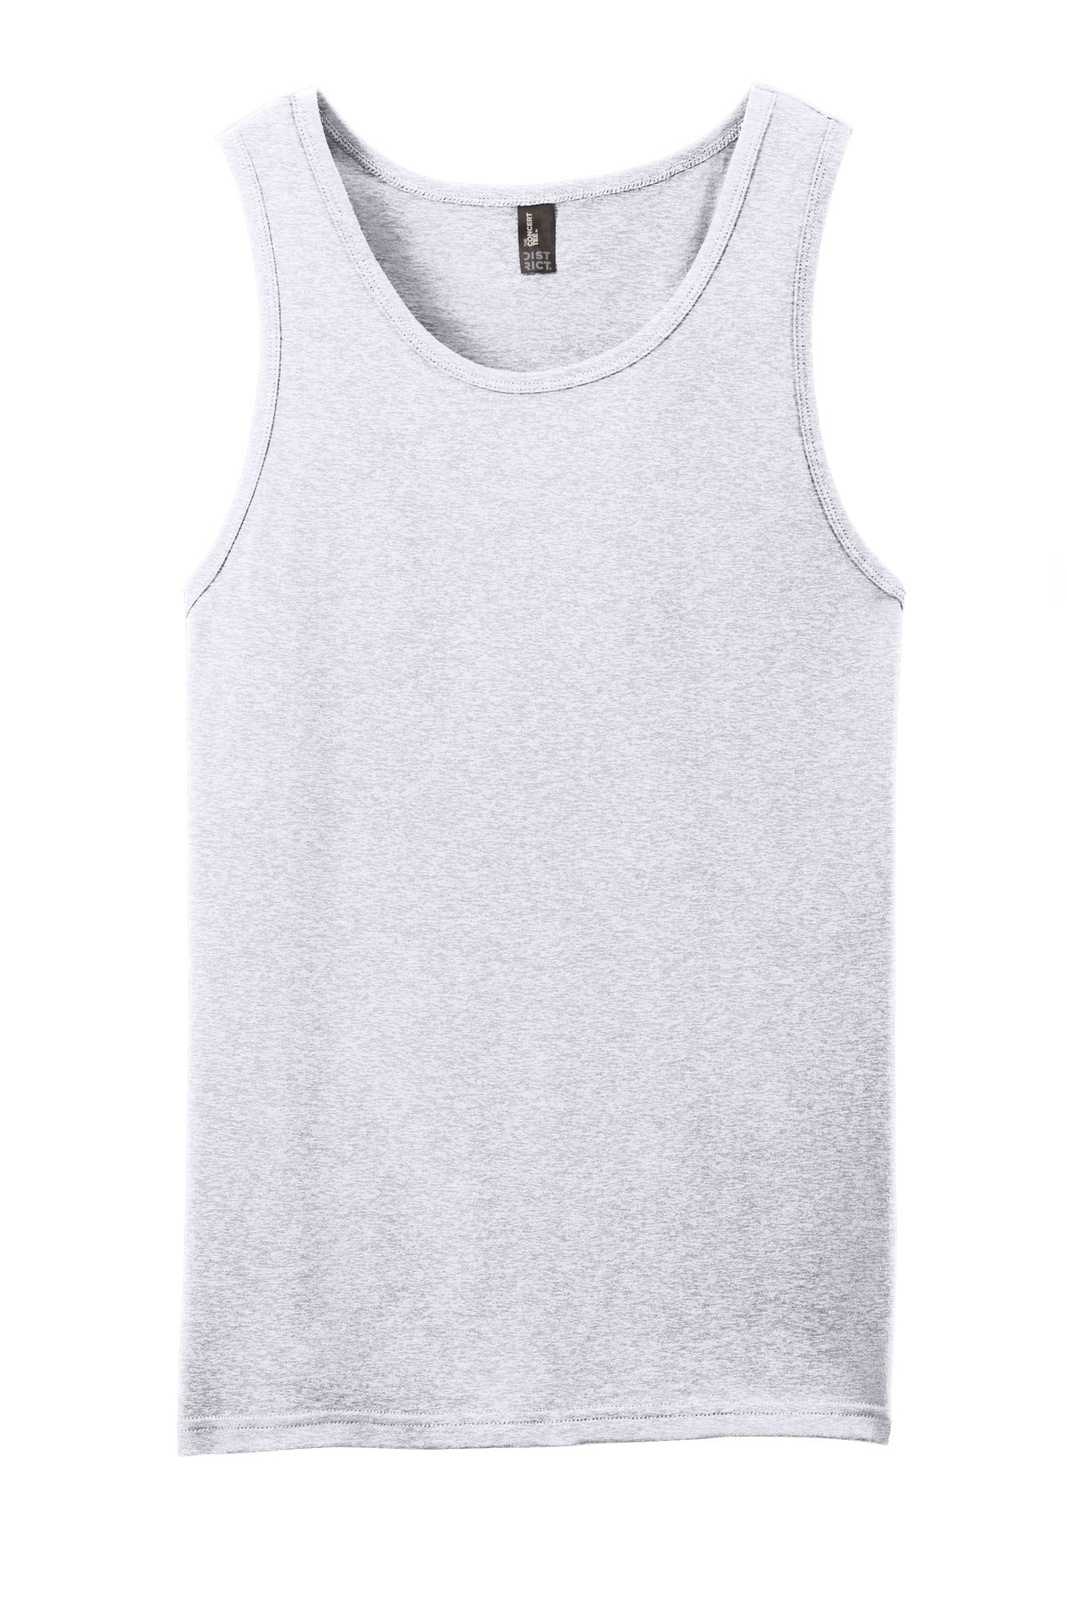 District DT5300 The Concert Tank - White Heather - HIT a Double - 5